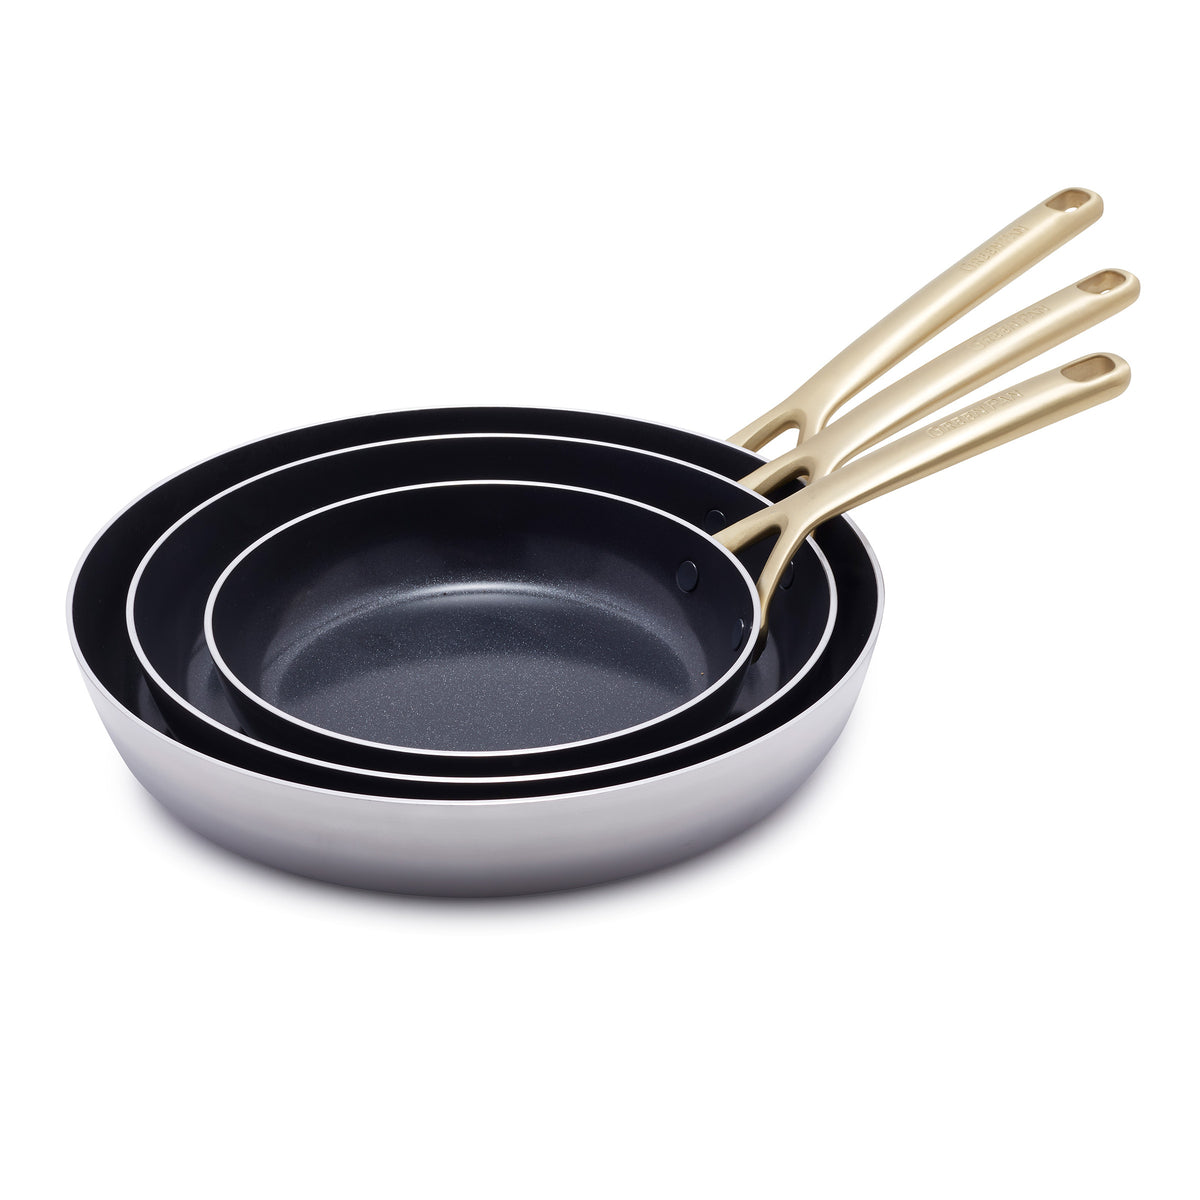 GreenPan GP5 Healthy Ceramic Nonstick Stainless Steel 2 Piece Frypan Set, 10 and 12